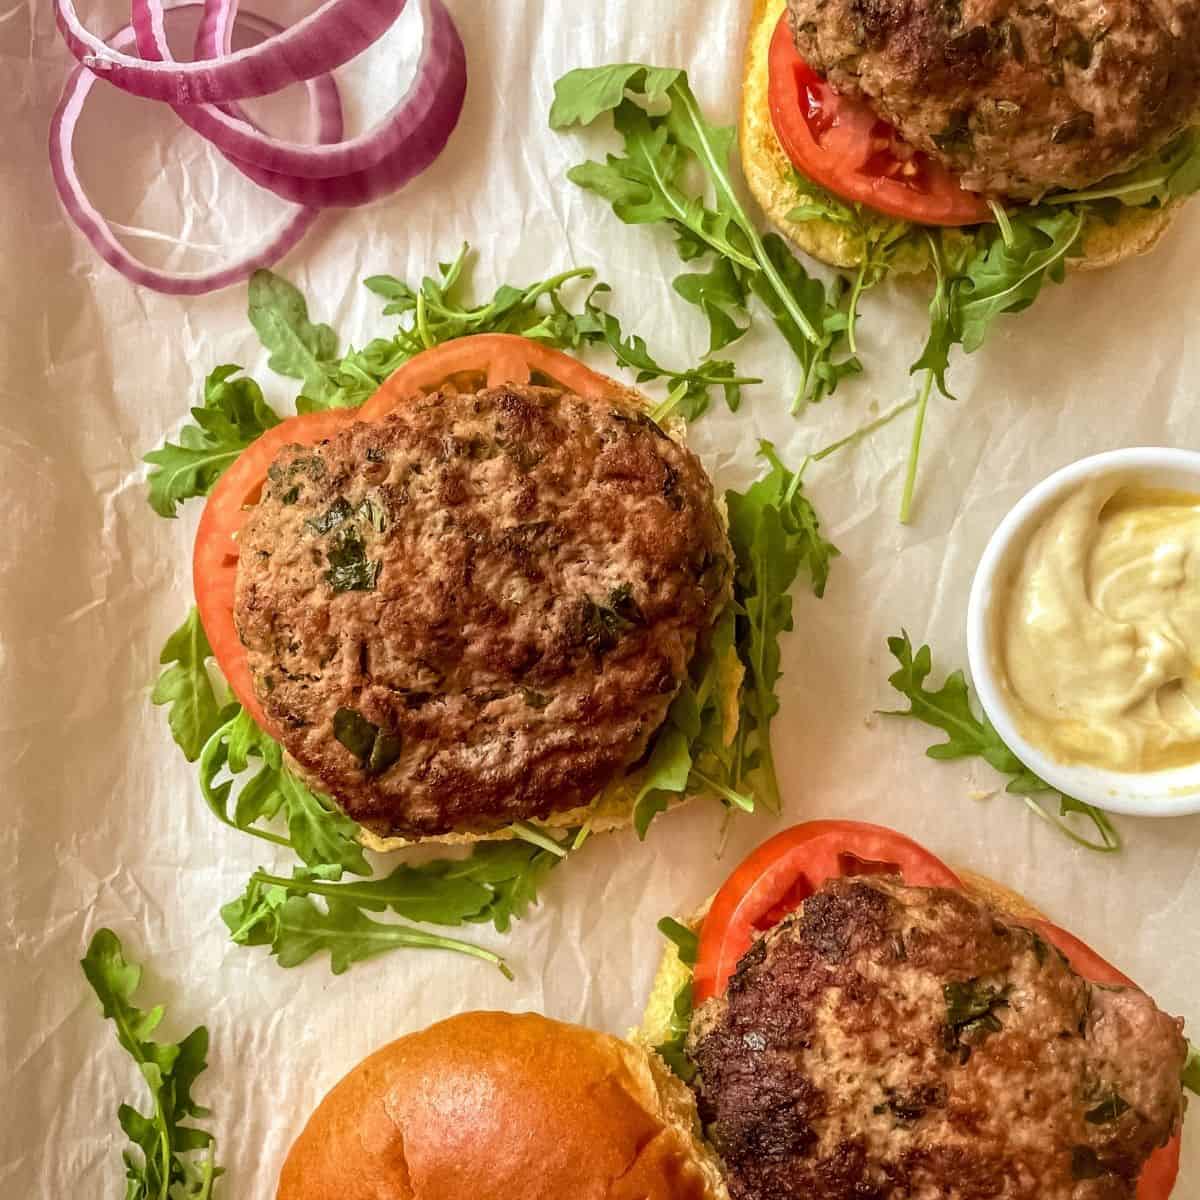 Three healthy turkey burgers on parchment paper, open face with arugula, red onion, sliced tomatoes, brioche buns and mustard.